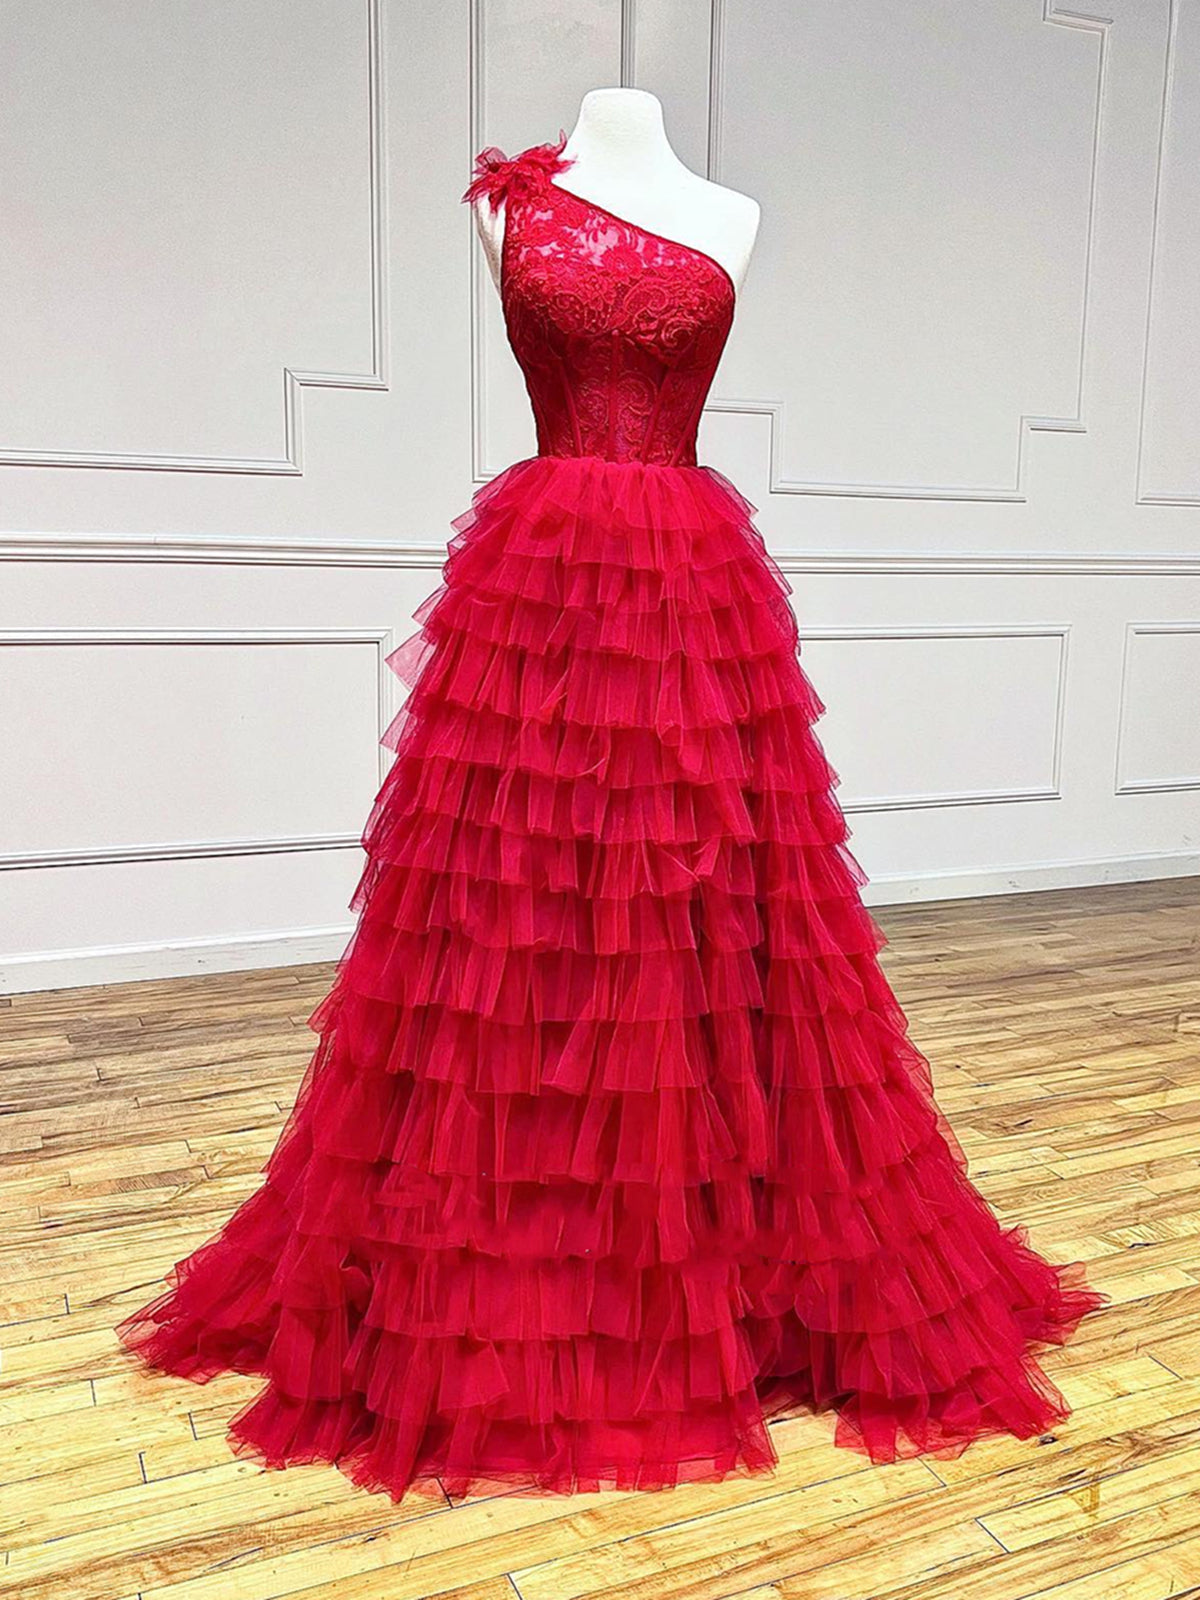 Midi Dress, One Shoulder Red Lace High Low Prom Dresses, Red High Low Lace Formal Evening Dresses